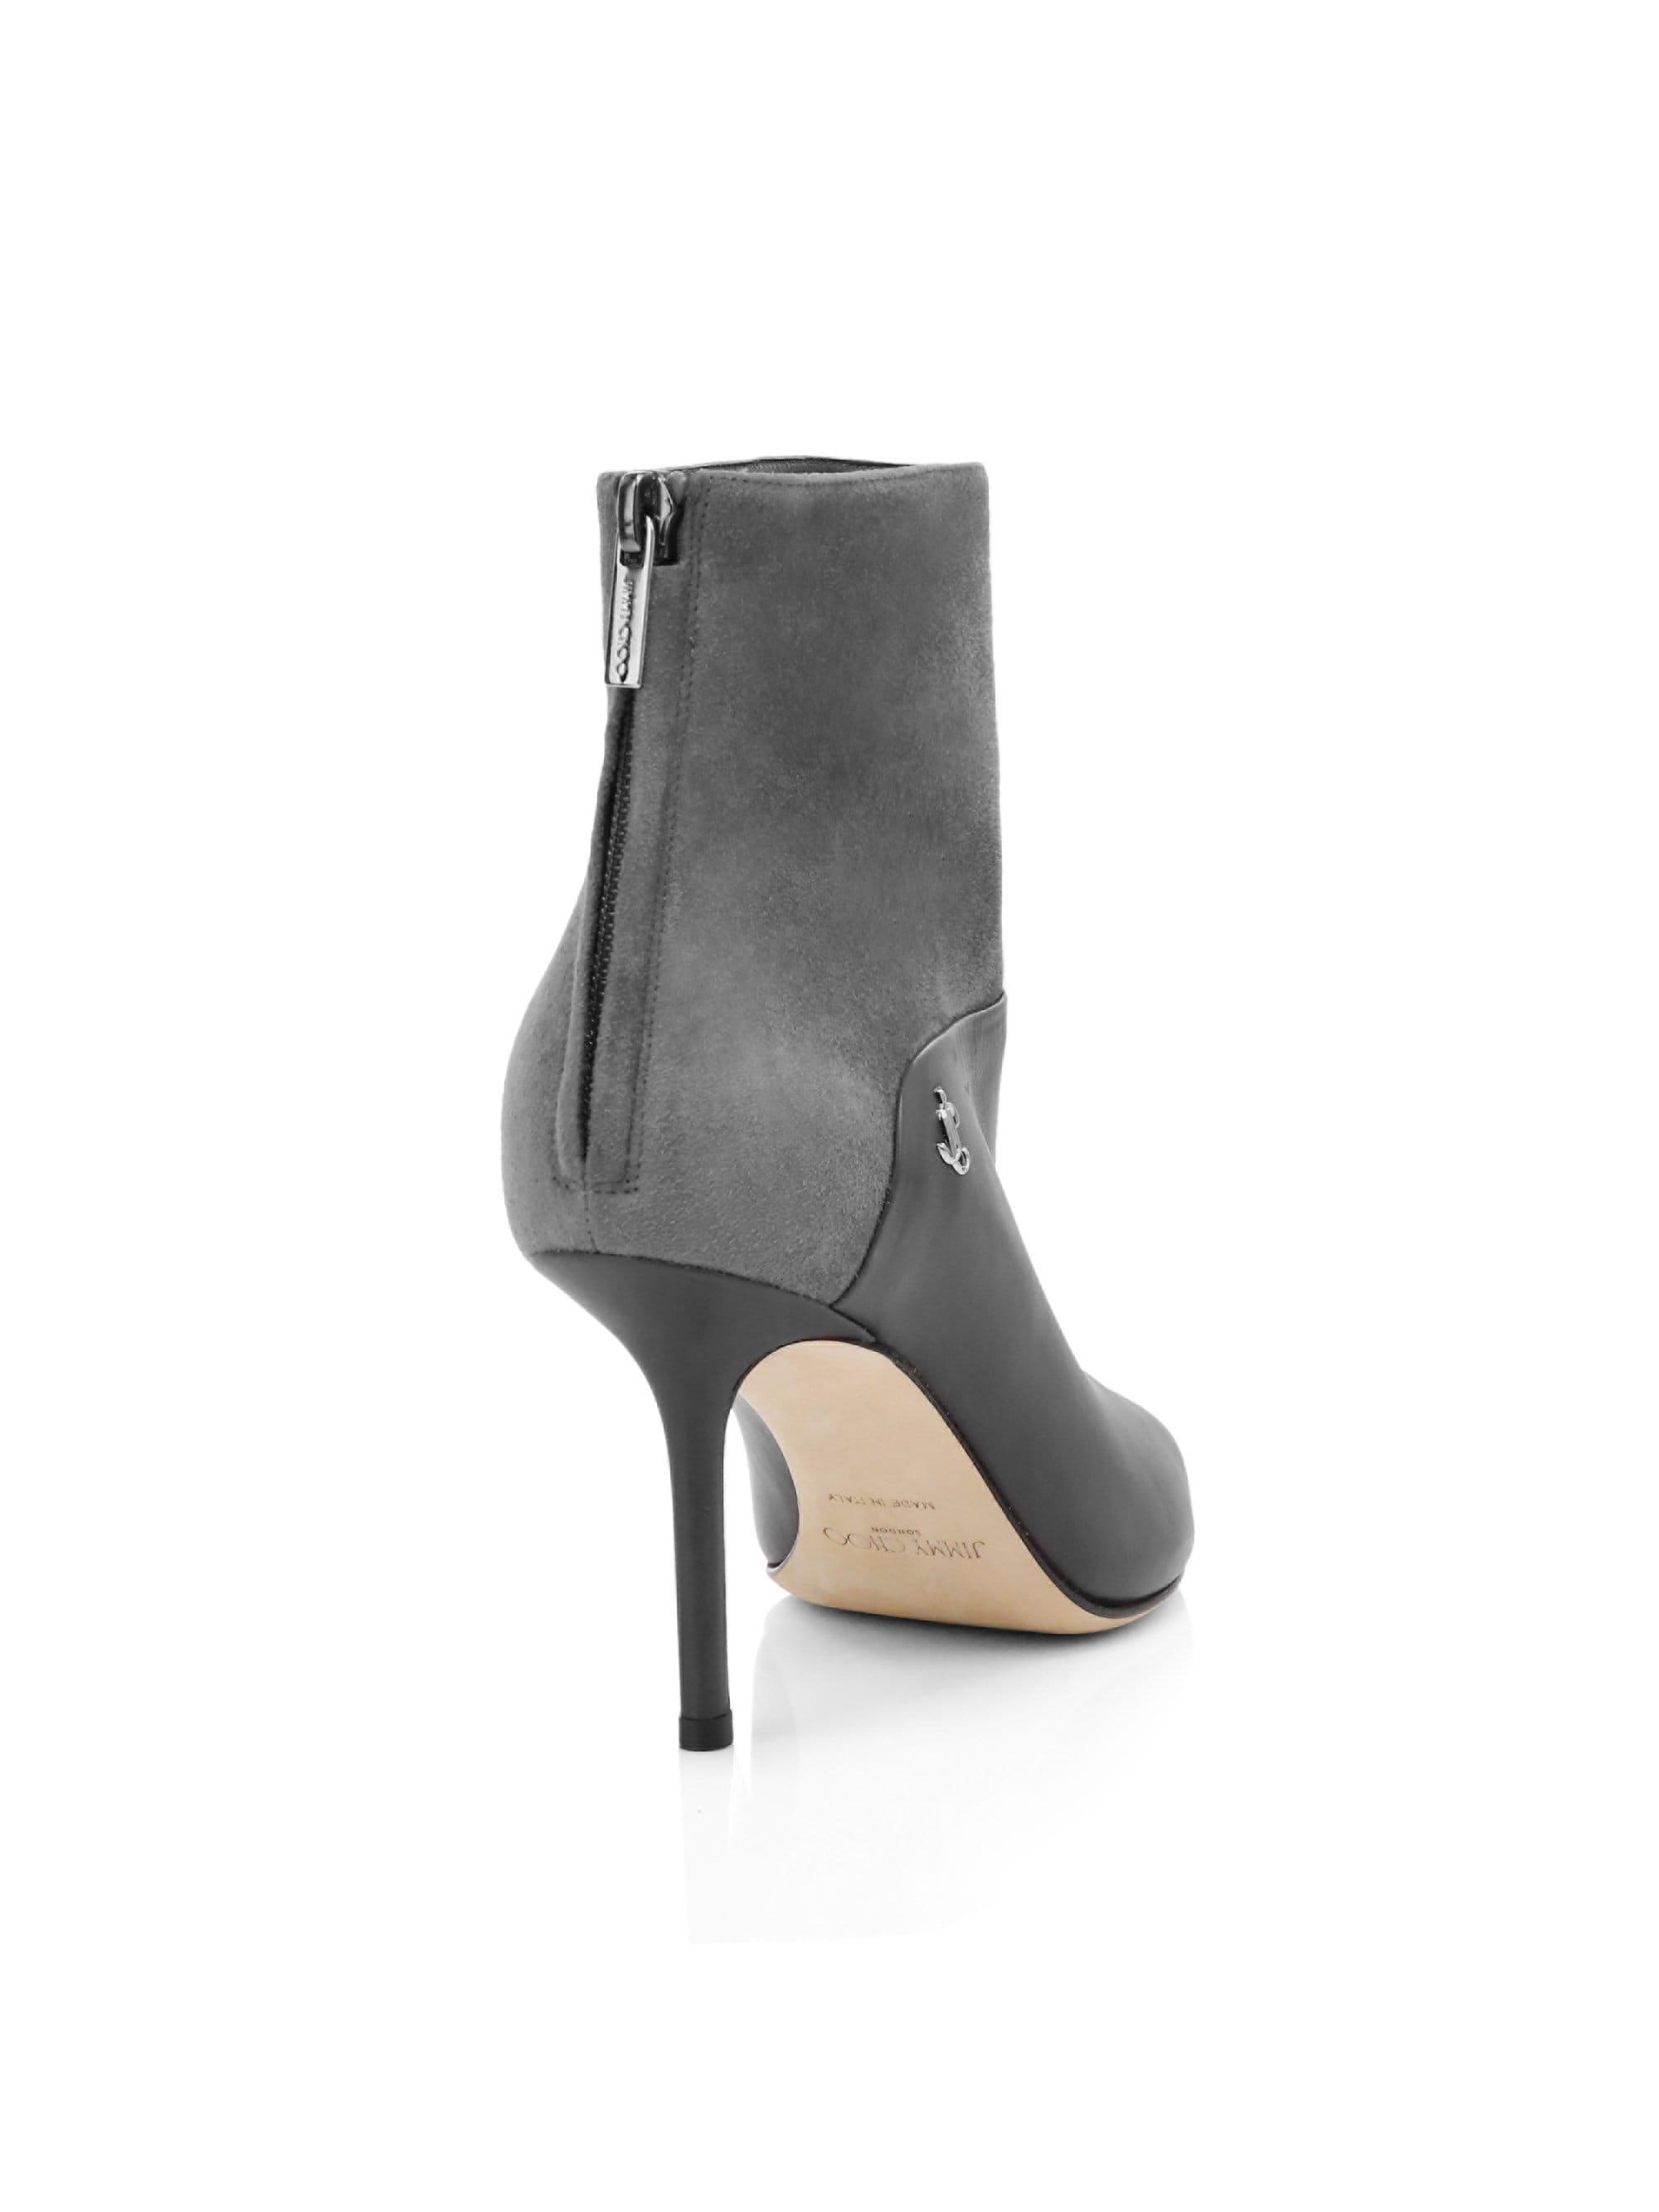 Jimmy Choo Beyla Suede & Leather Point-toe Booties in Gray - Lyst